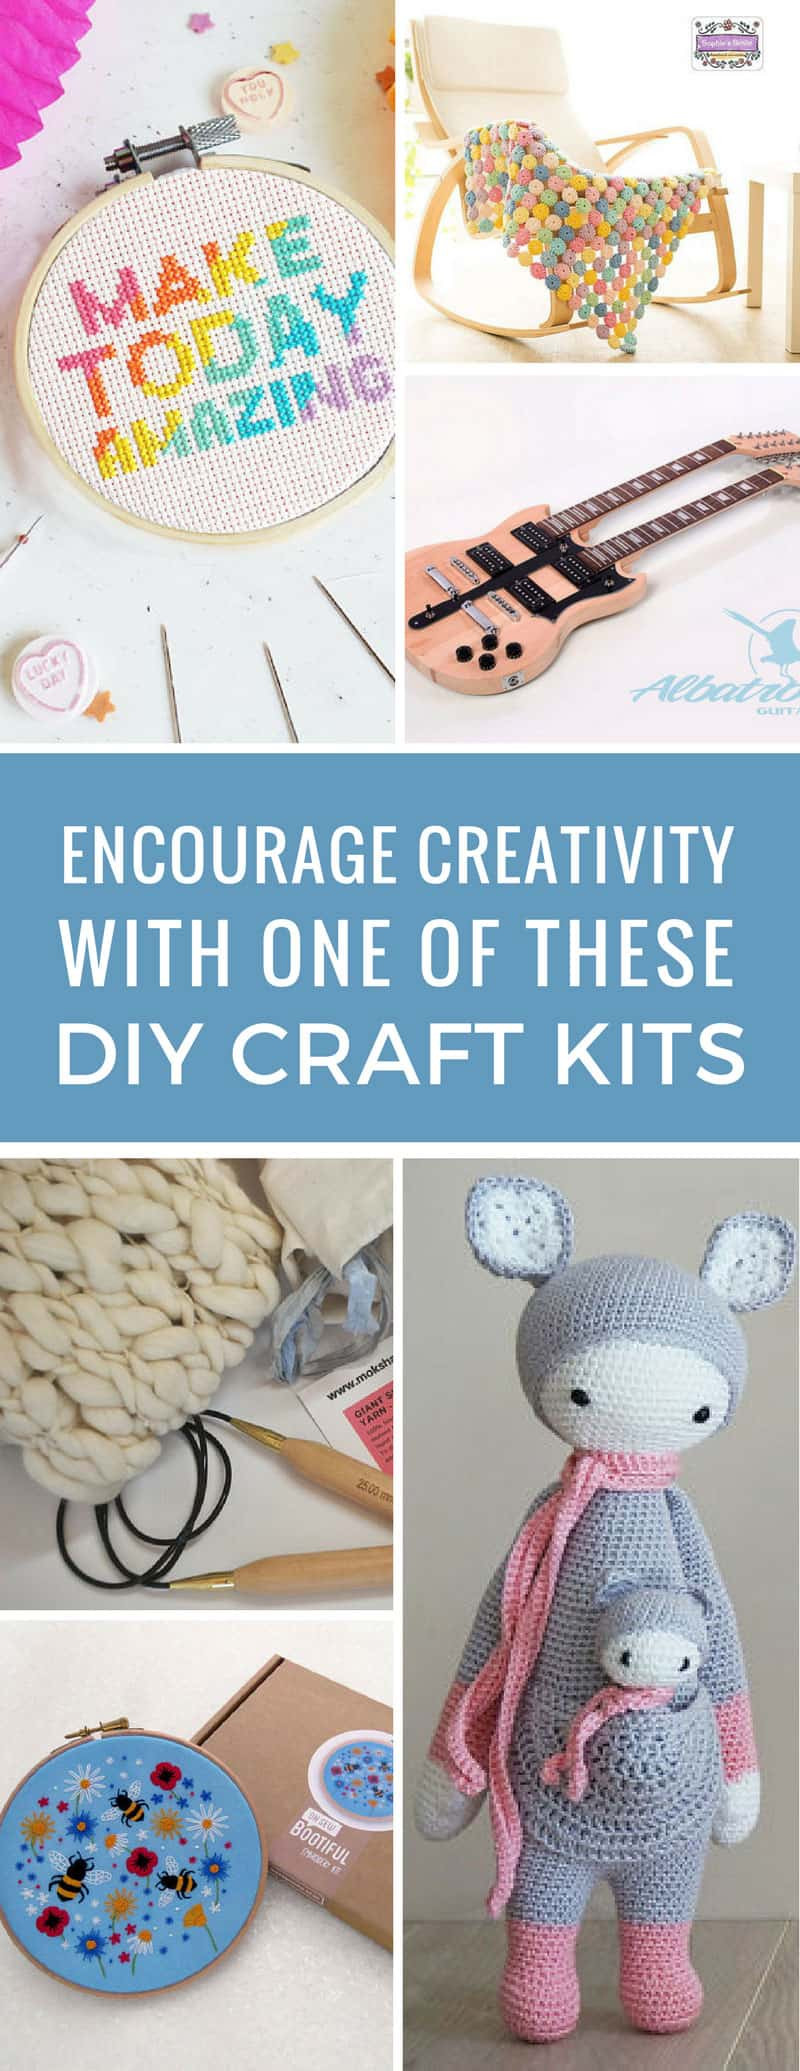 DIY Craft Kits
 These Gorgeous DIY Craft Kits Make a Unique Gift for Any